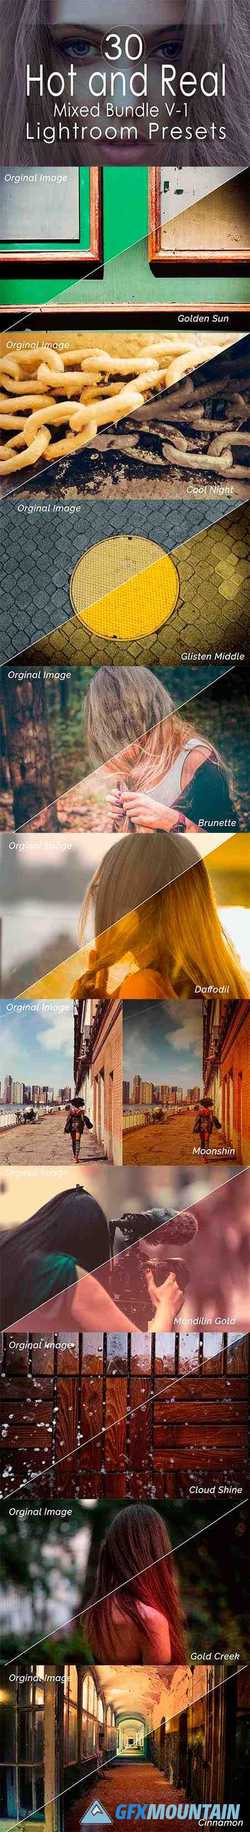 Hot and Real Mixed Lightroom Presets 3715558